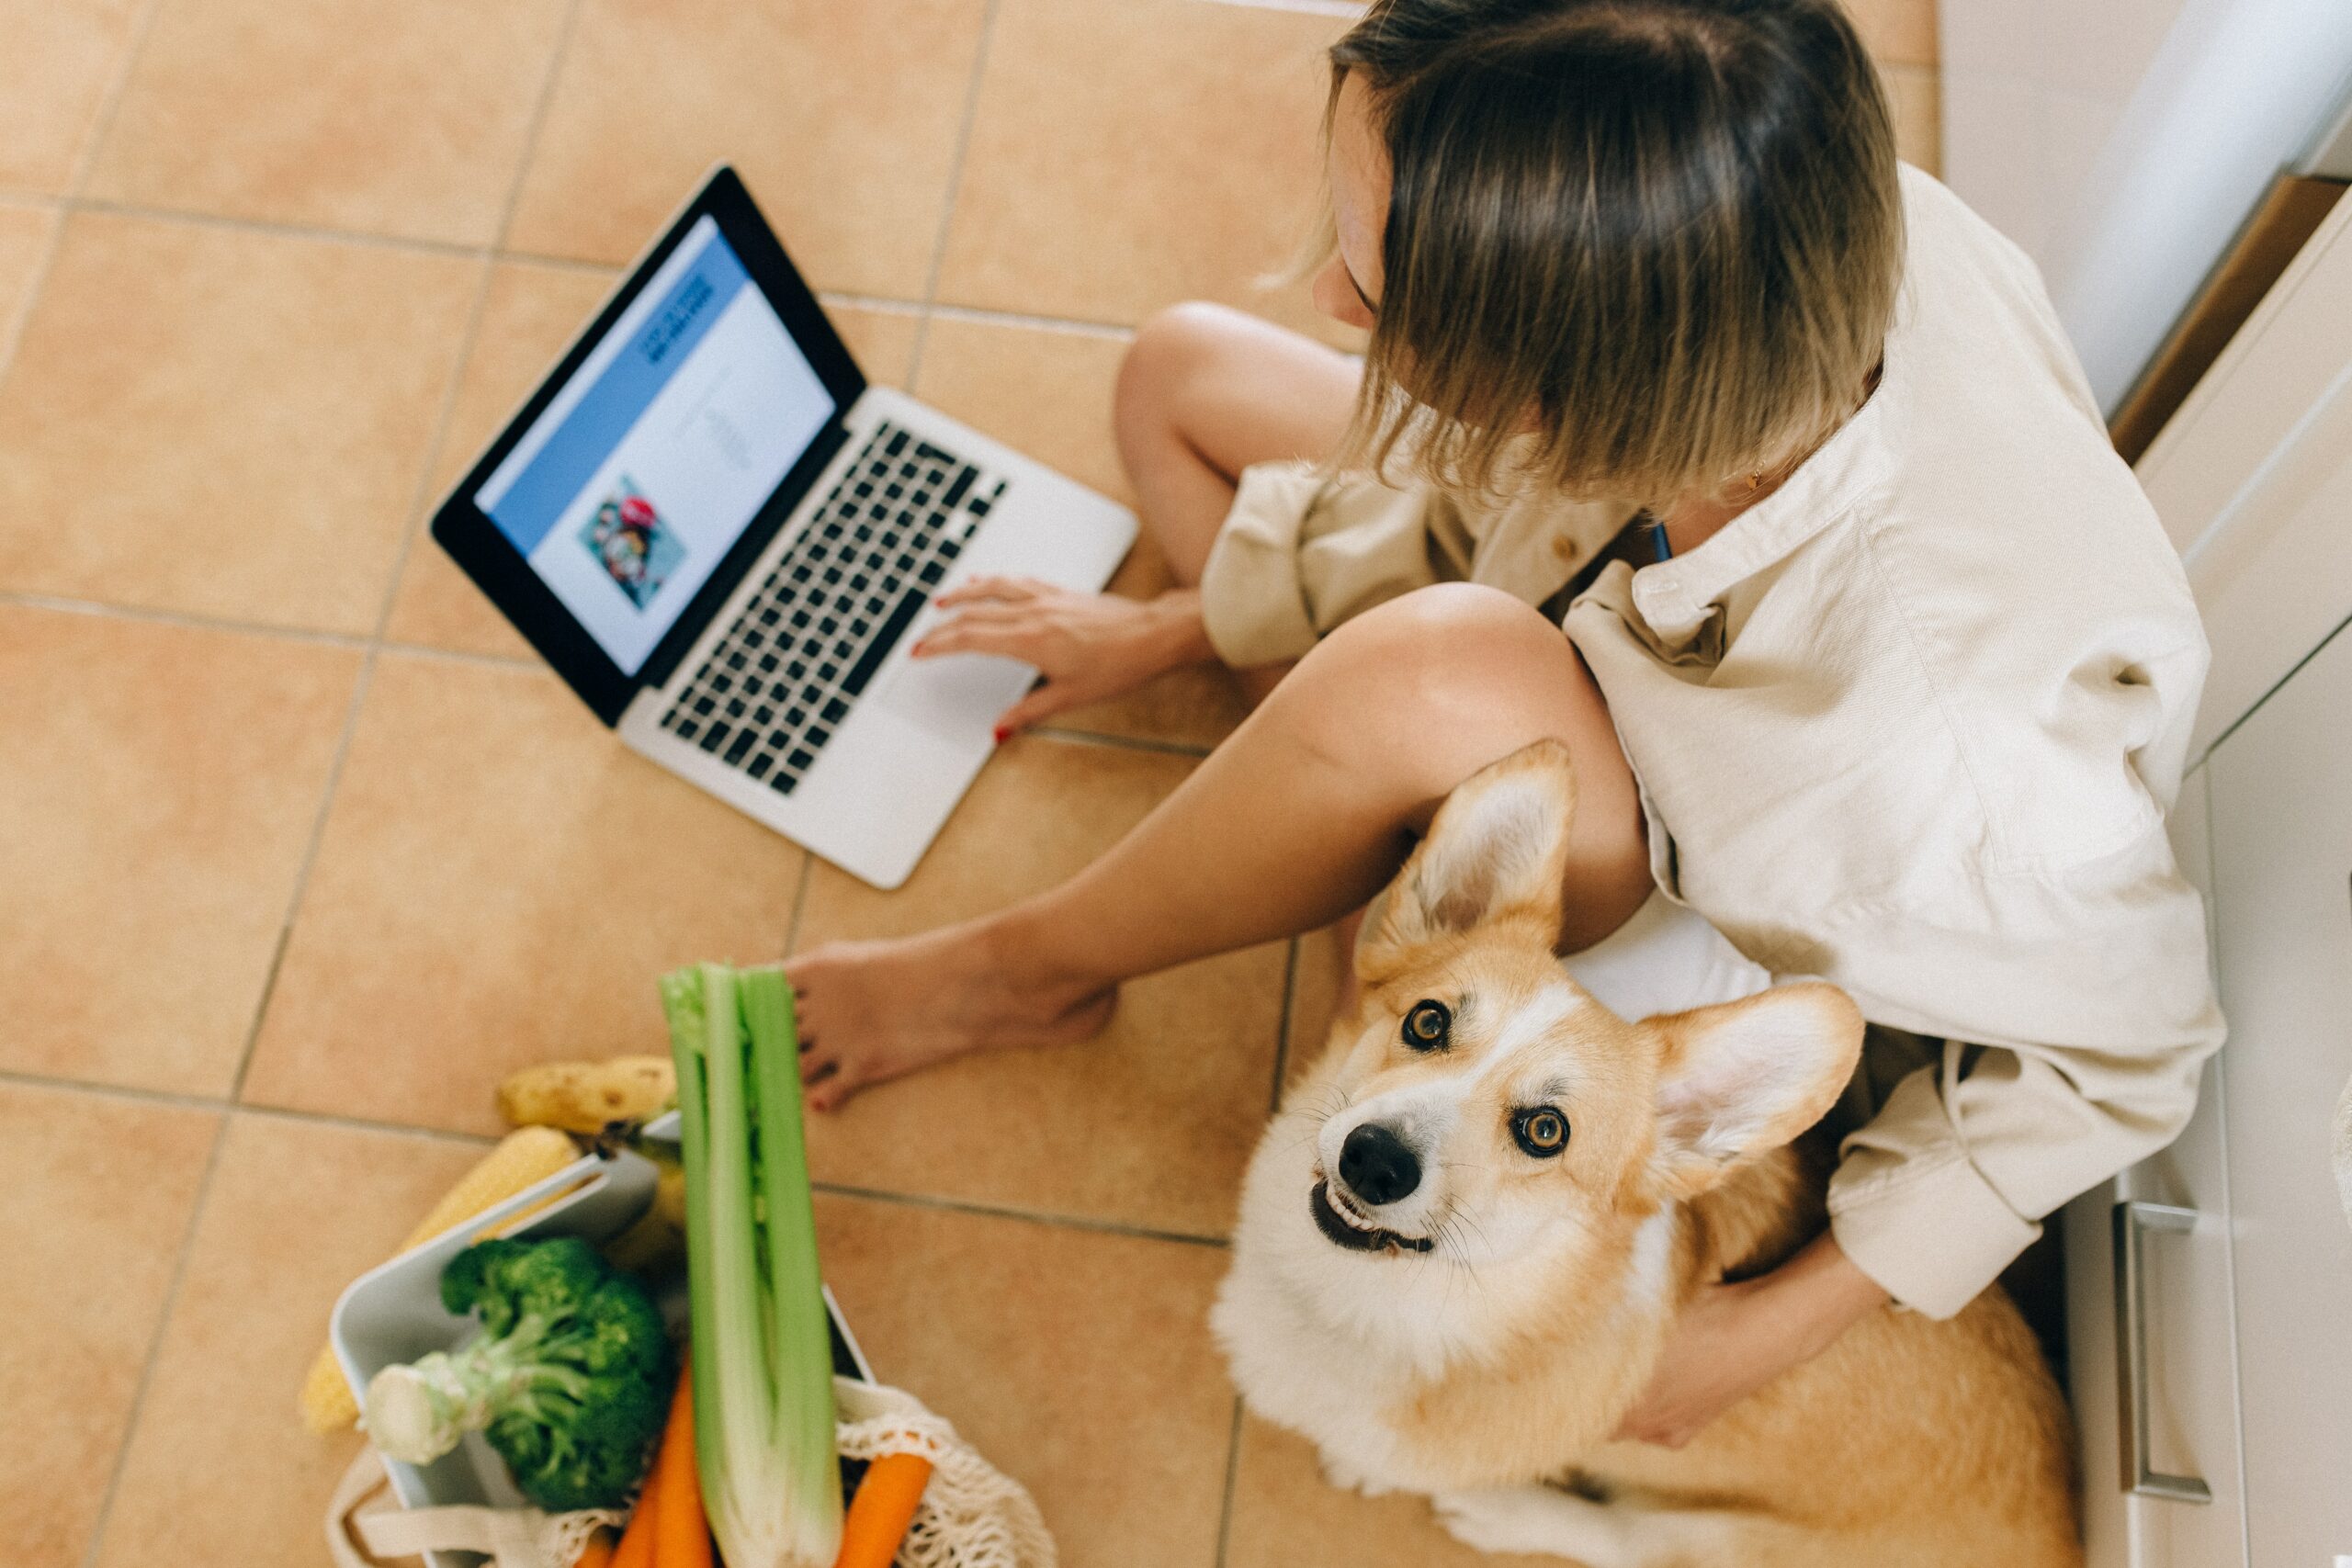 Woman on laptop with dog and bag of vegetables.